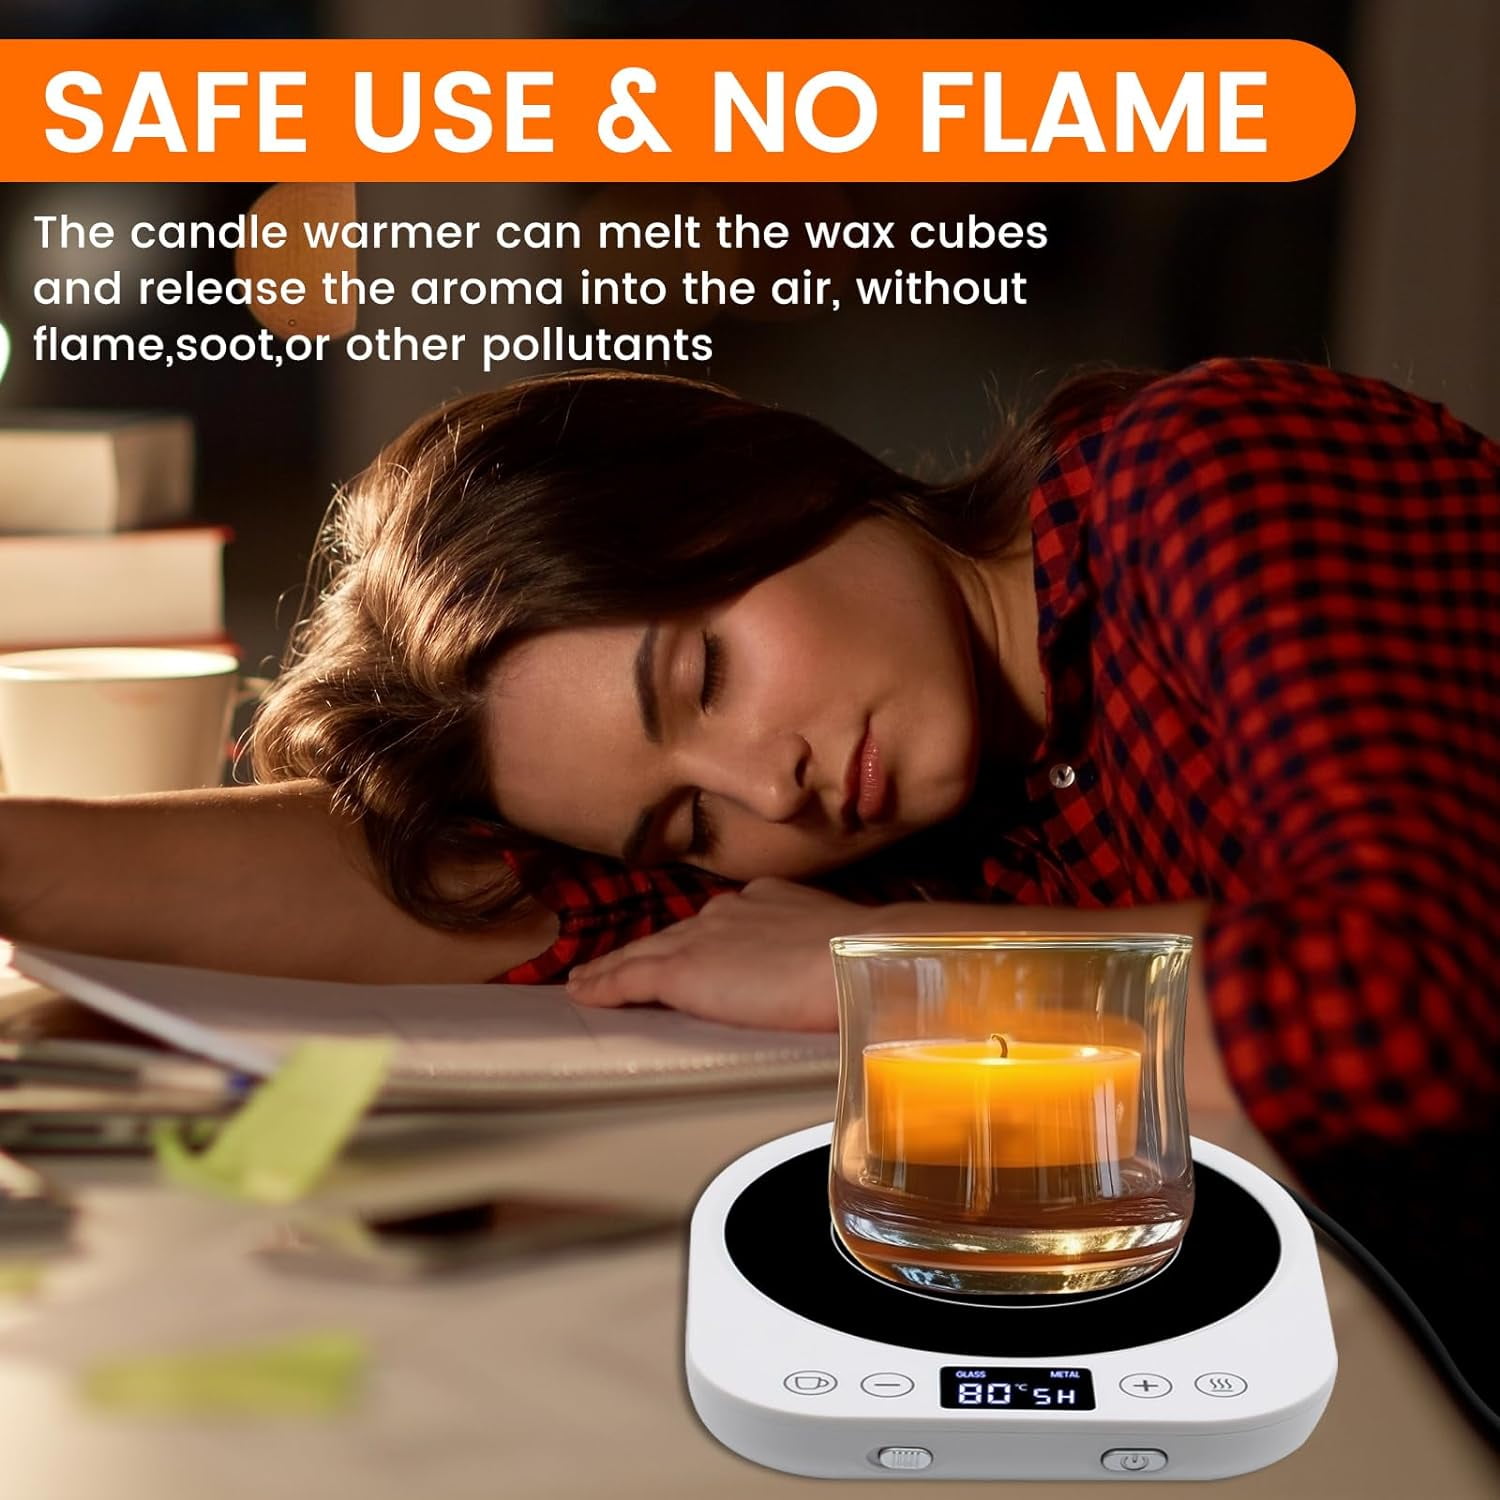  Dimux Coffee Mug Warmer Pressure-Activated, Auto On/Off  Gravity-induction Mug Warmer for Office Desk Use, Candle Wax Cup Warmer  Heating Plat Electric Mug Warmer for Office Desks and Family Living Room:  Home